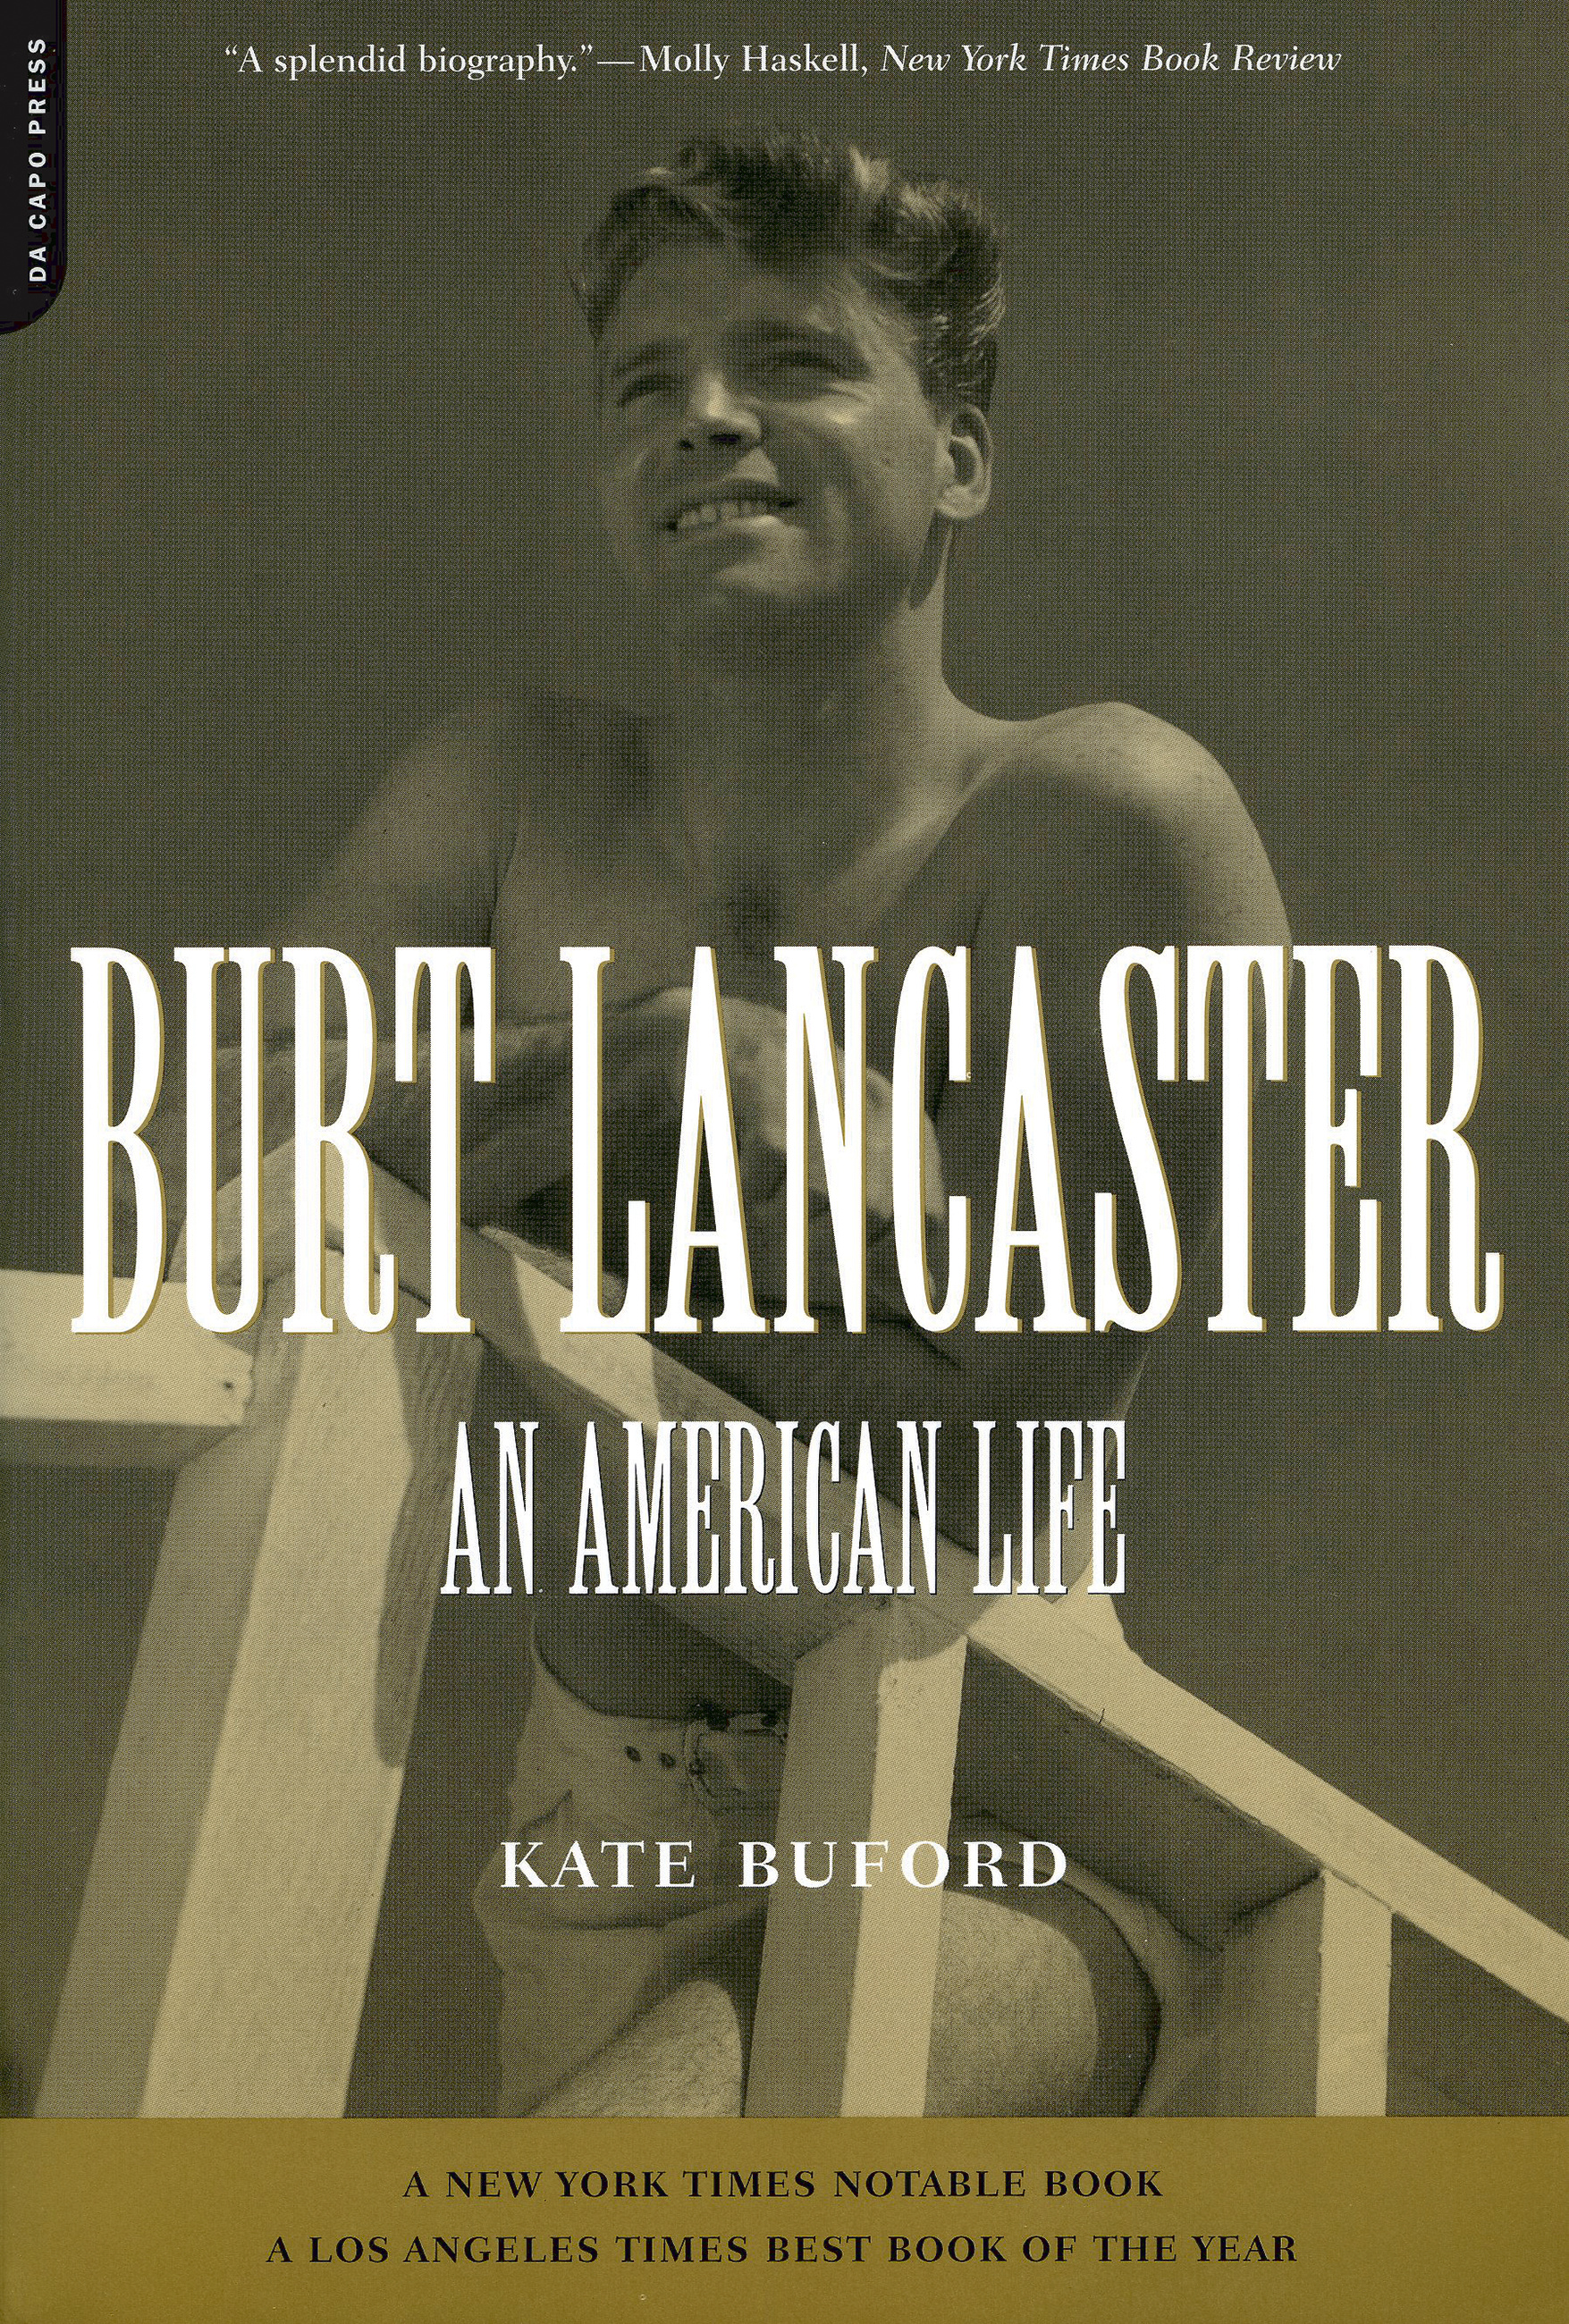 Burt Lancaster by Kate Buford Hachette Book Group